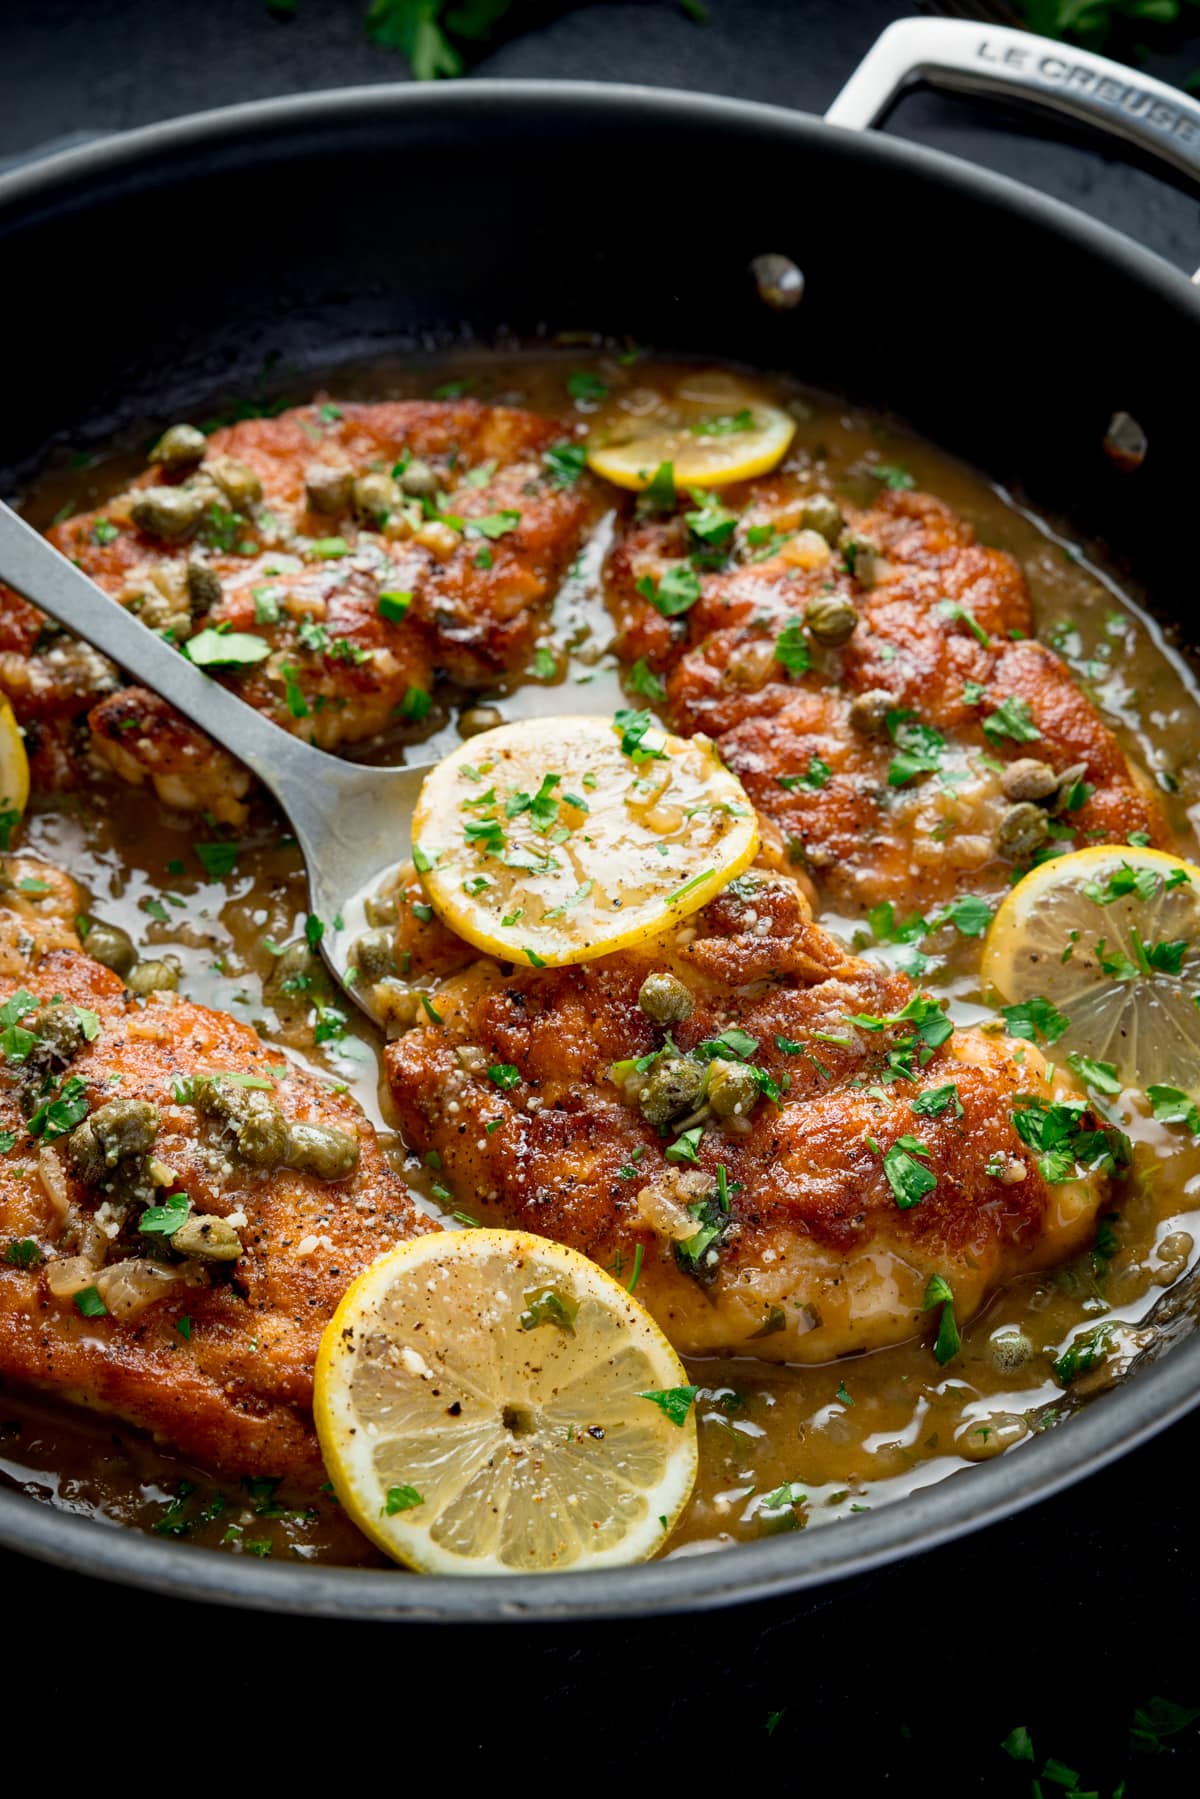 Lemon chicken piccata in a black pan topped with lemon sliced and parsley. There is a spoon starting to lift up one of the pieces of chicken.